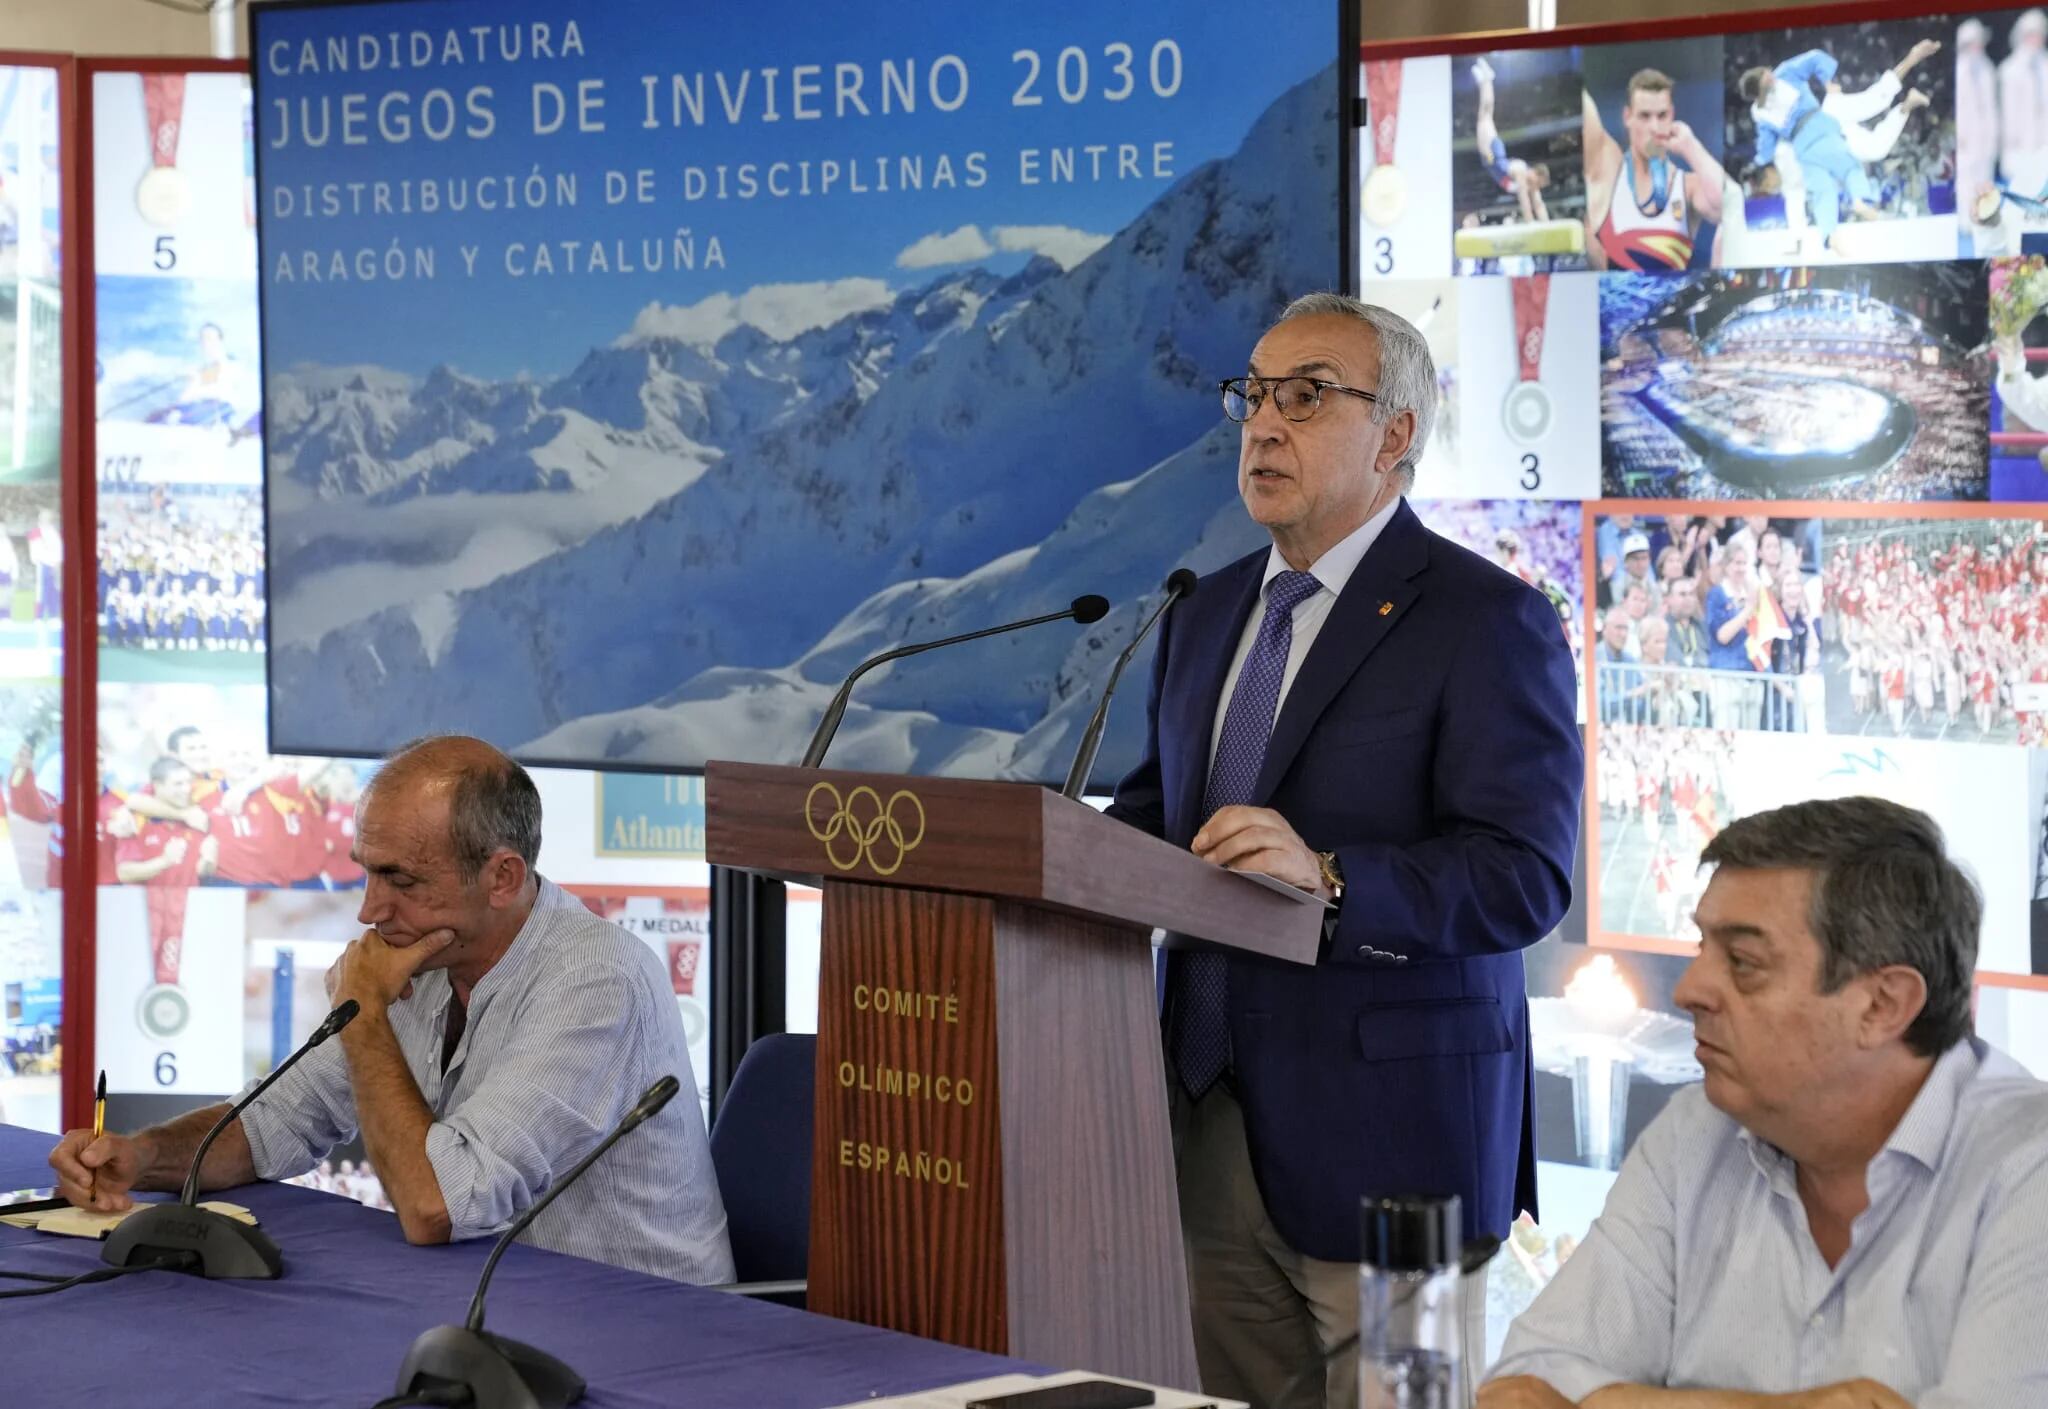 Spain withdraws from the race for the Winter Olympics in 2030